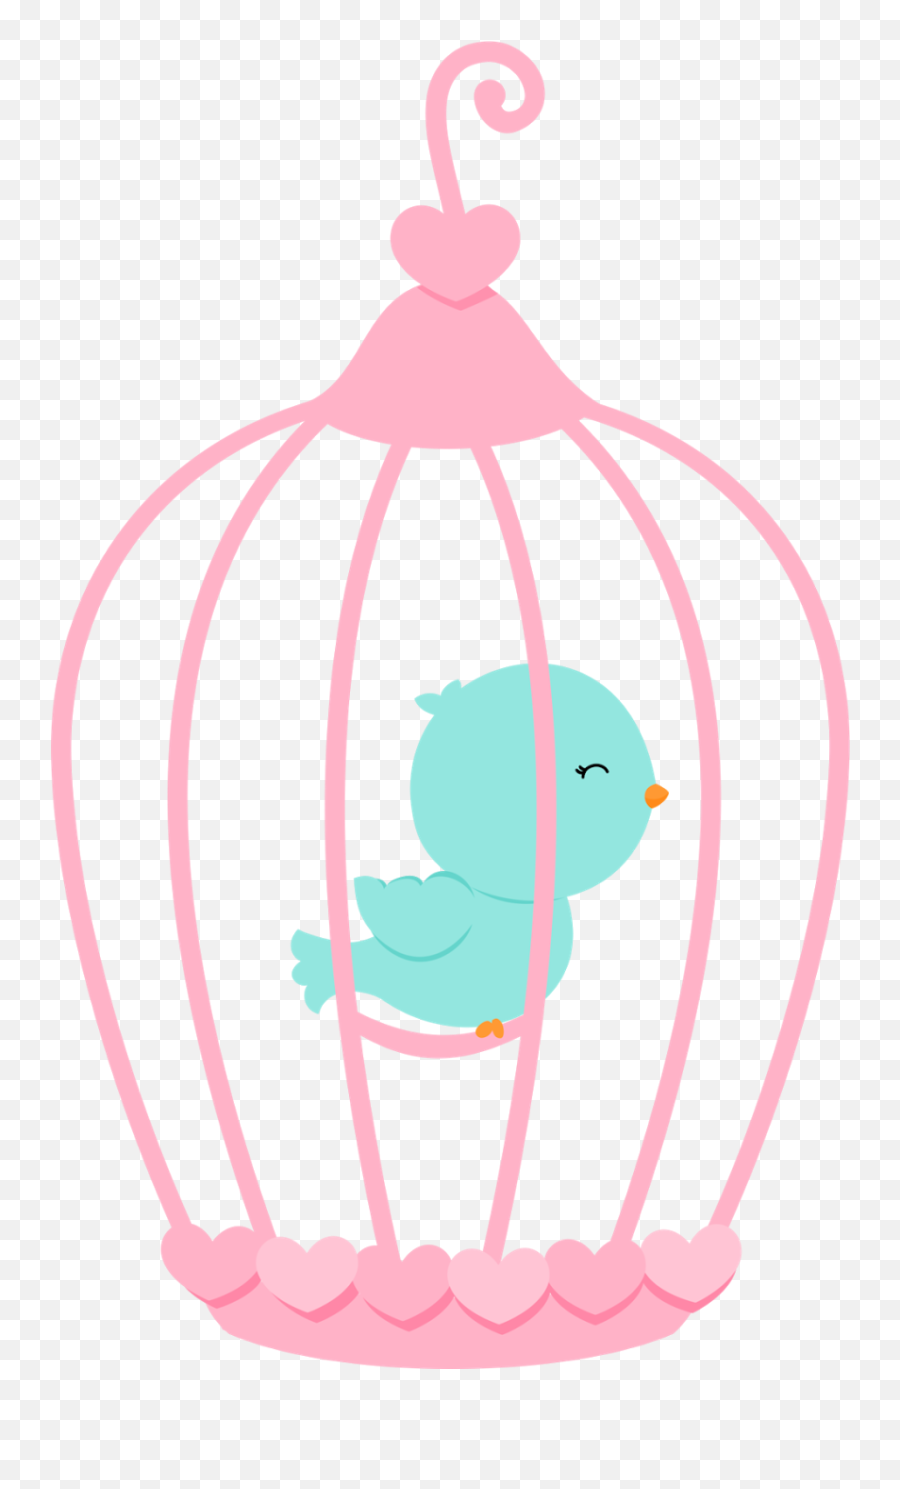 Bird Cage Png - Free Machine Embroidery Designs Love Birds Birds In Its Cage Cartoon,Birdcage Png